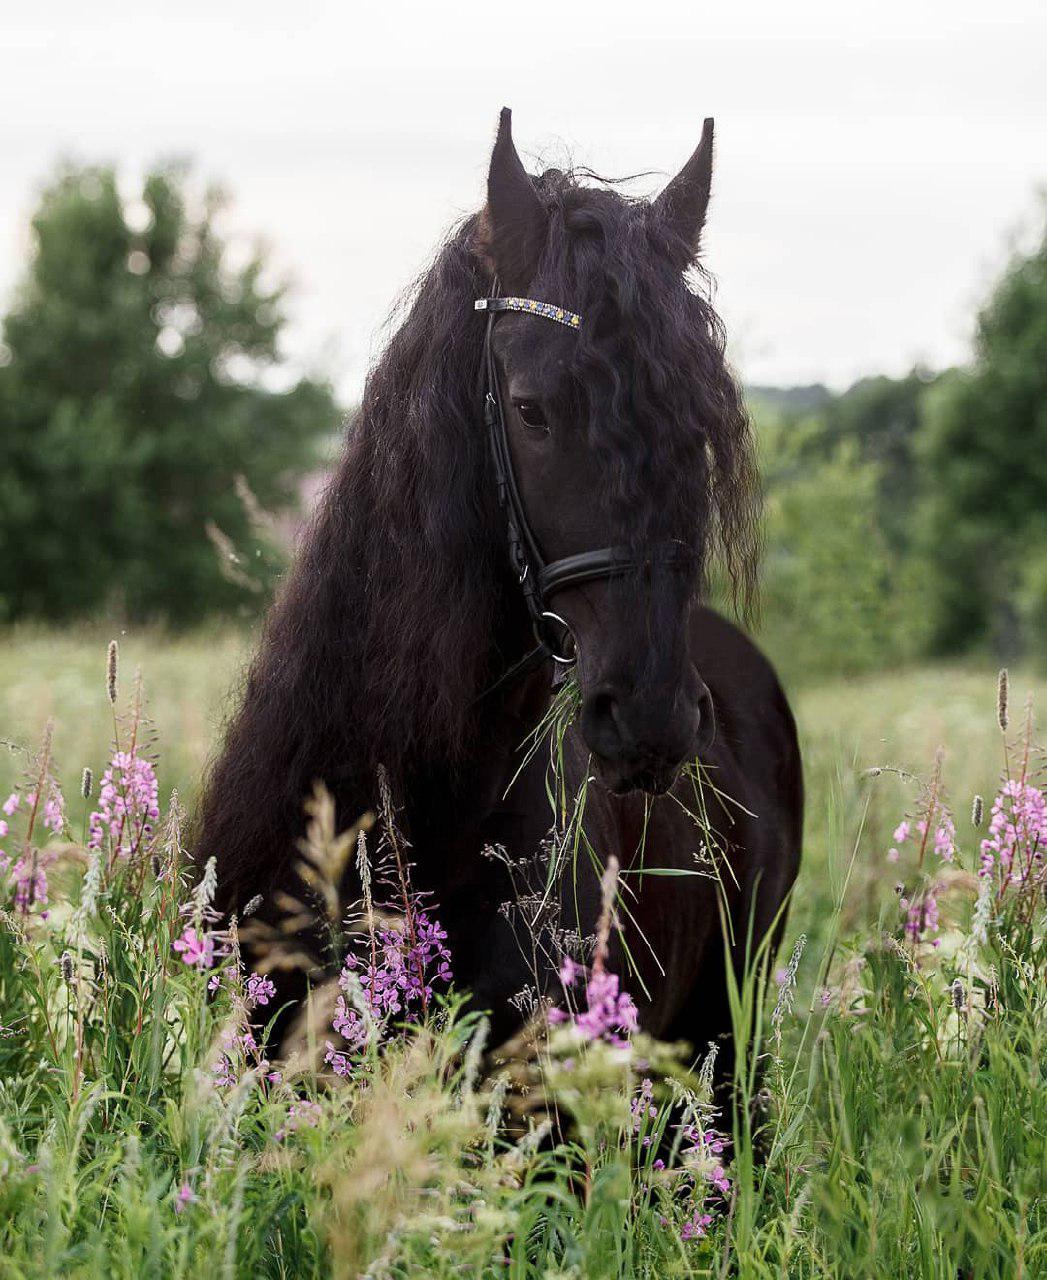 black horse with curly hair smelling the flowers